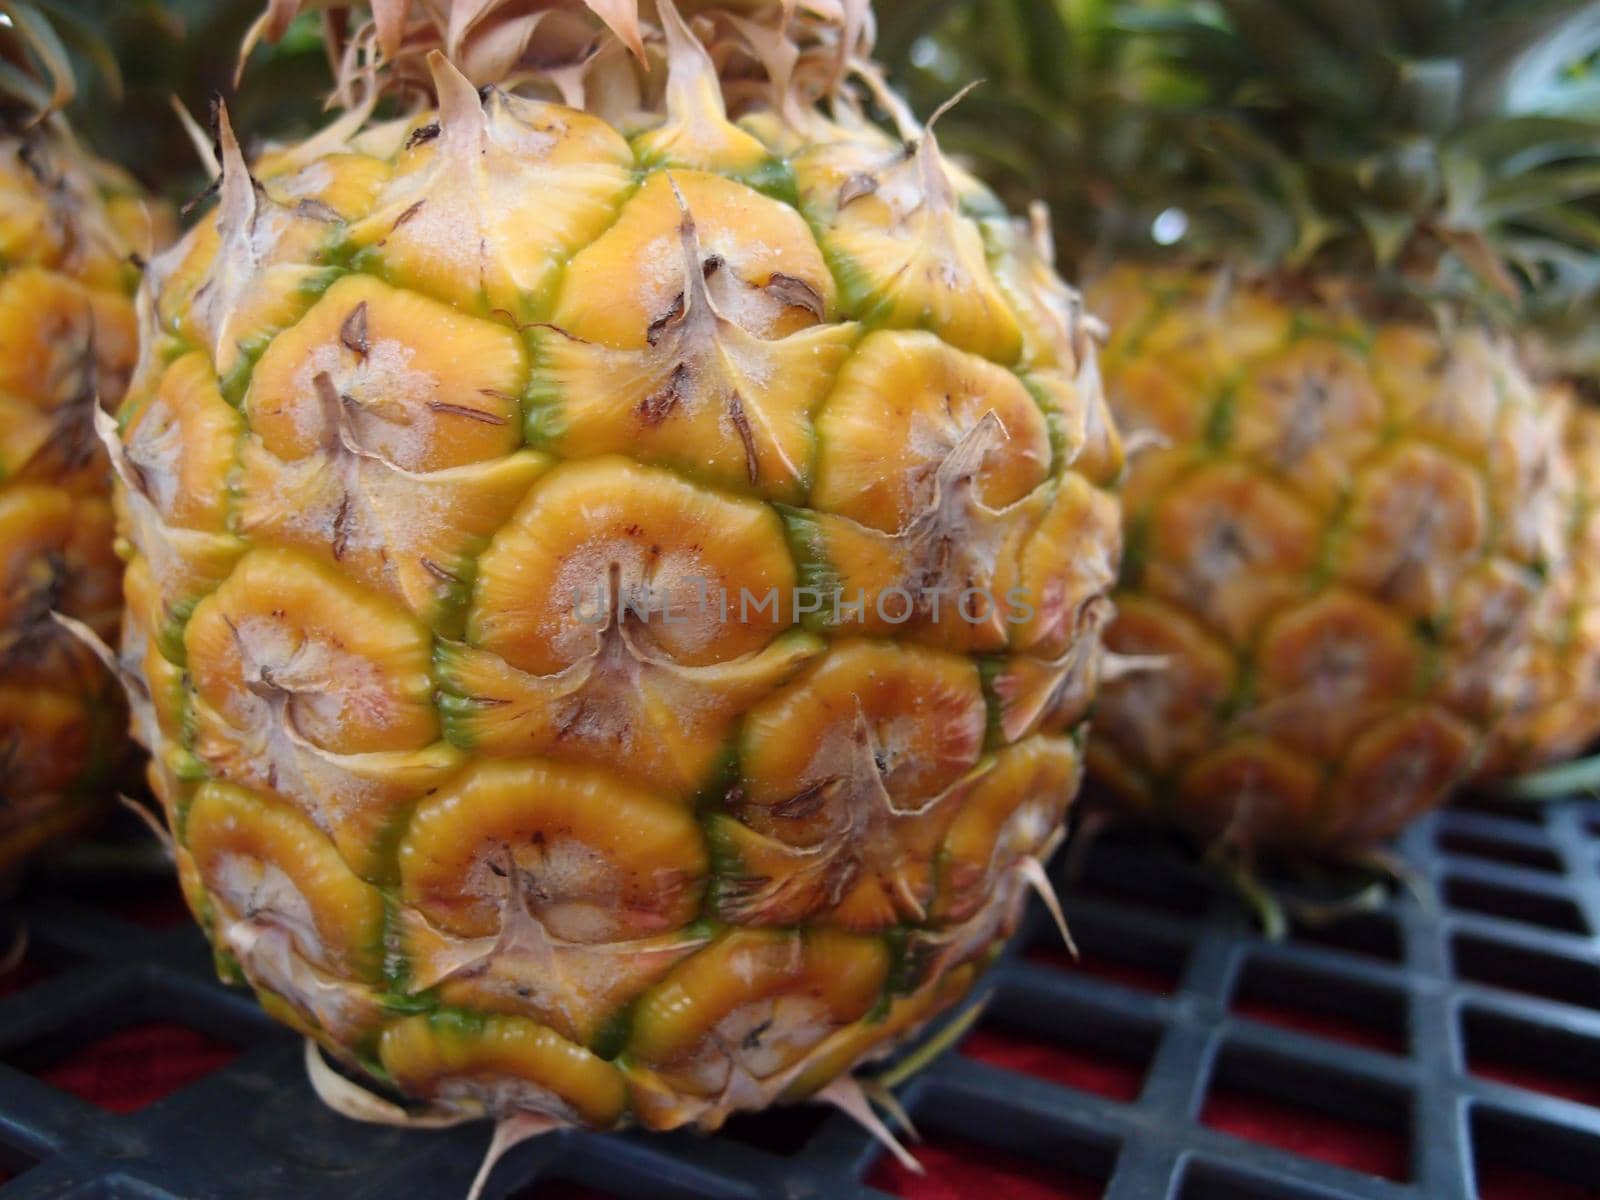 Close-up of row of mini Pineapple for sale at farmers market.